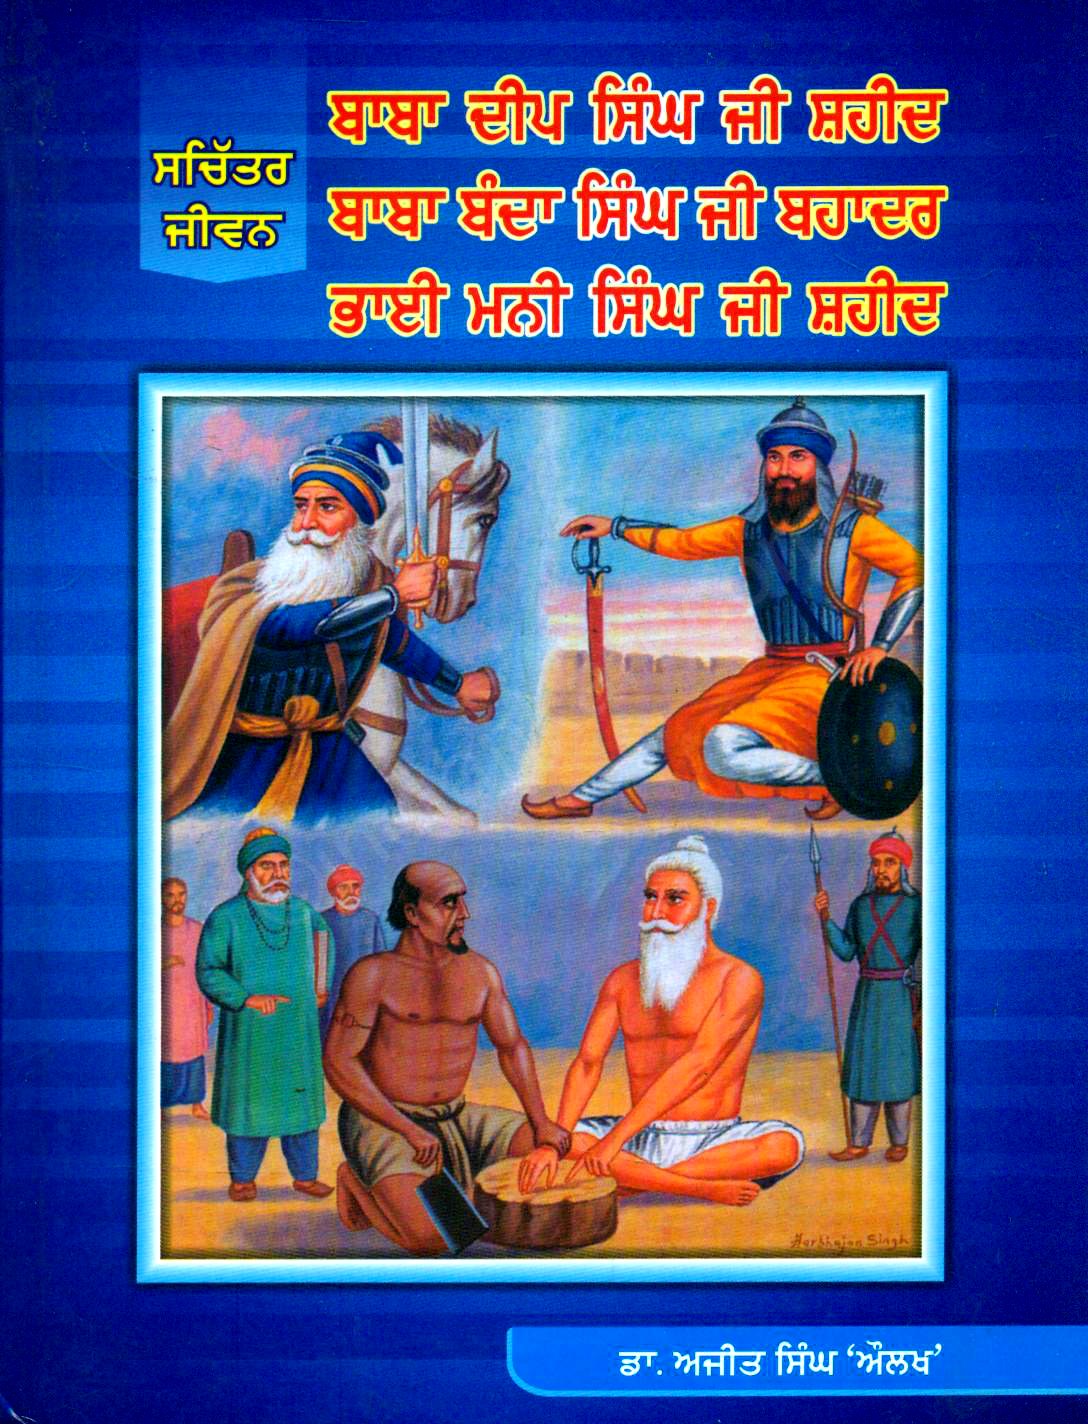 Image Not Available - Baba Deep Singh Shaheed - 1088x1424 Wallpaper -  